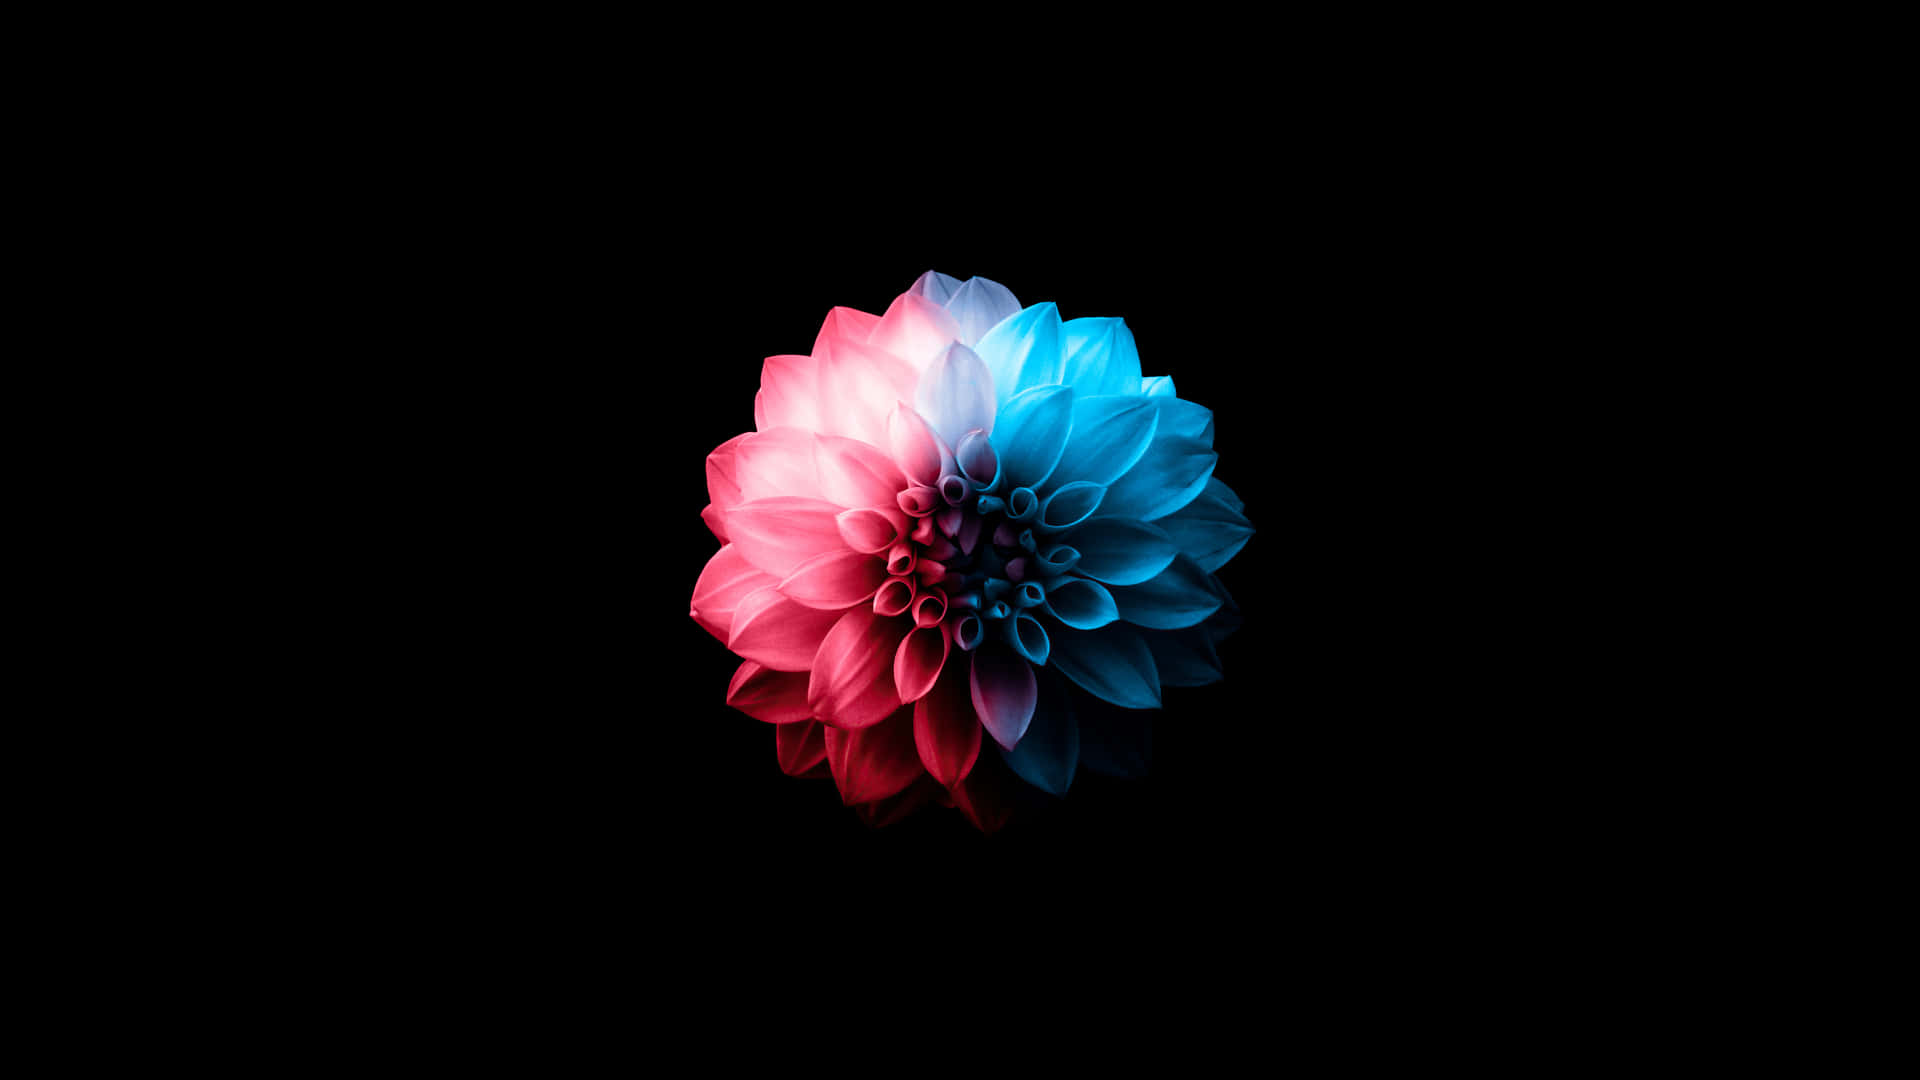 A Flower With Blue And Pink Colors On A Black Background